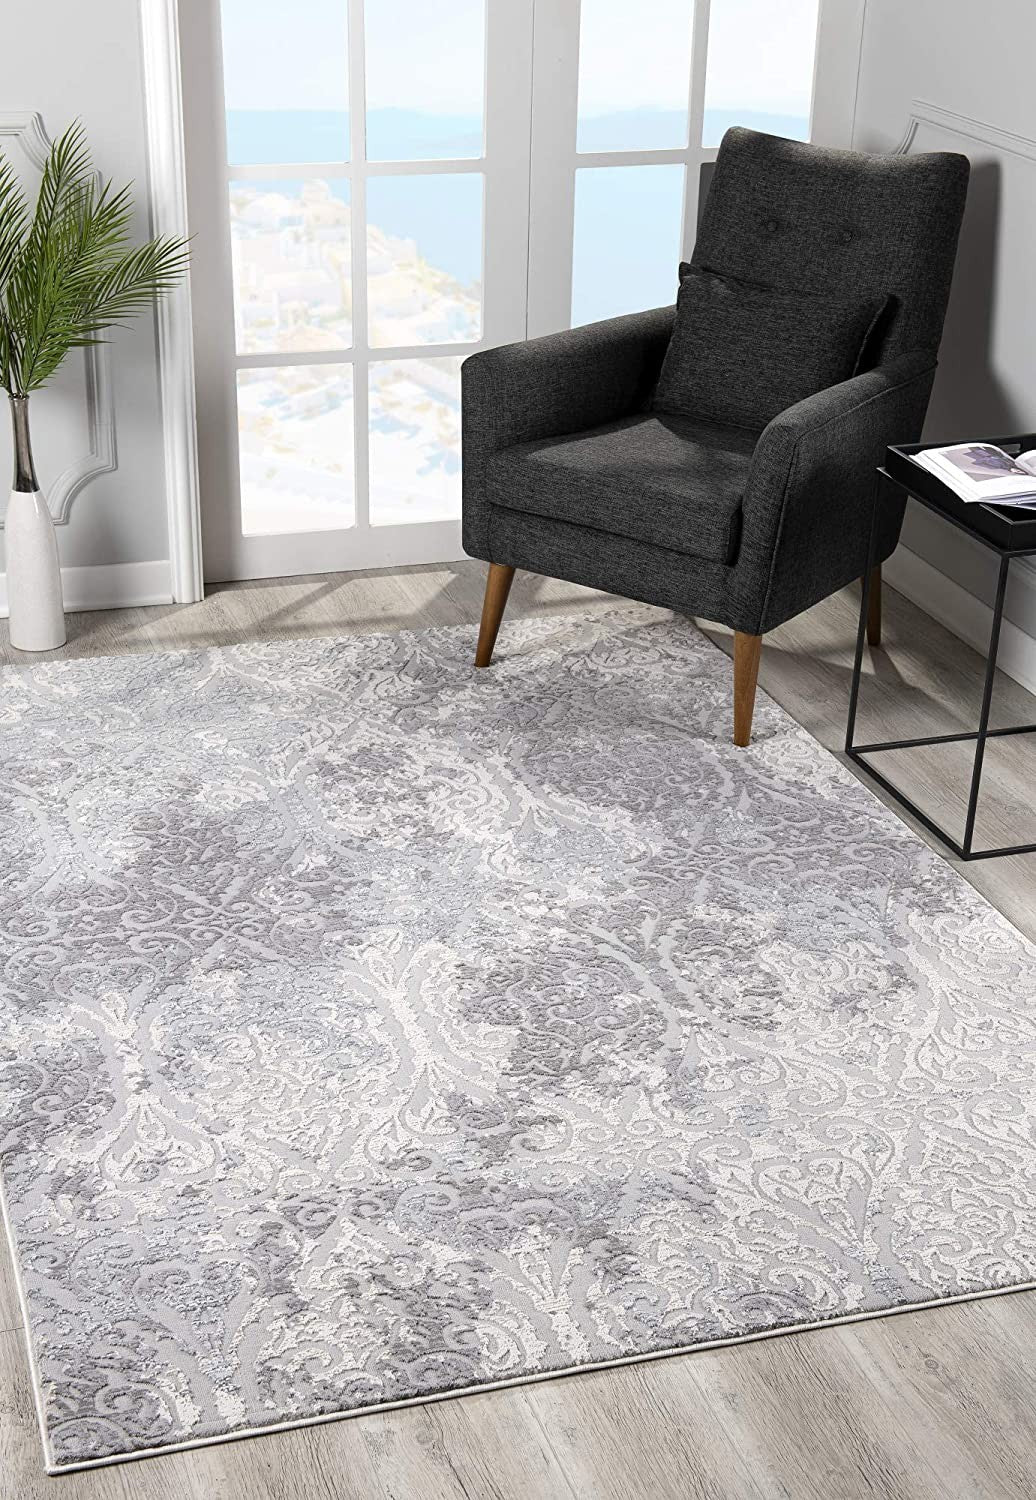 4’ X 6’ Cream And Gray Tinted Ogee Pattern Area Rug